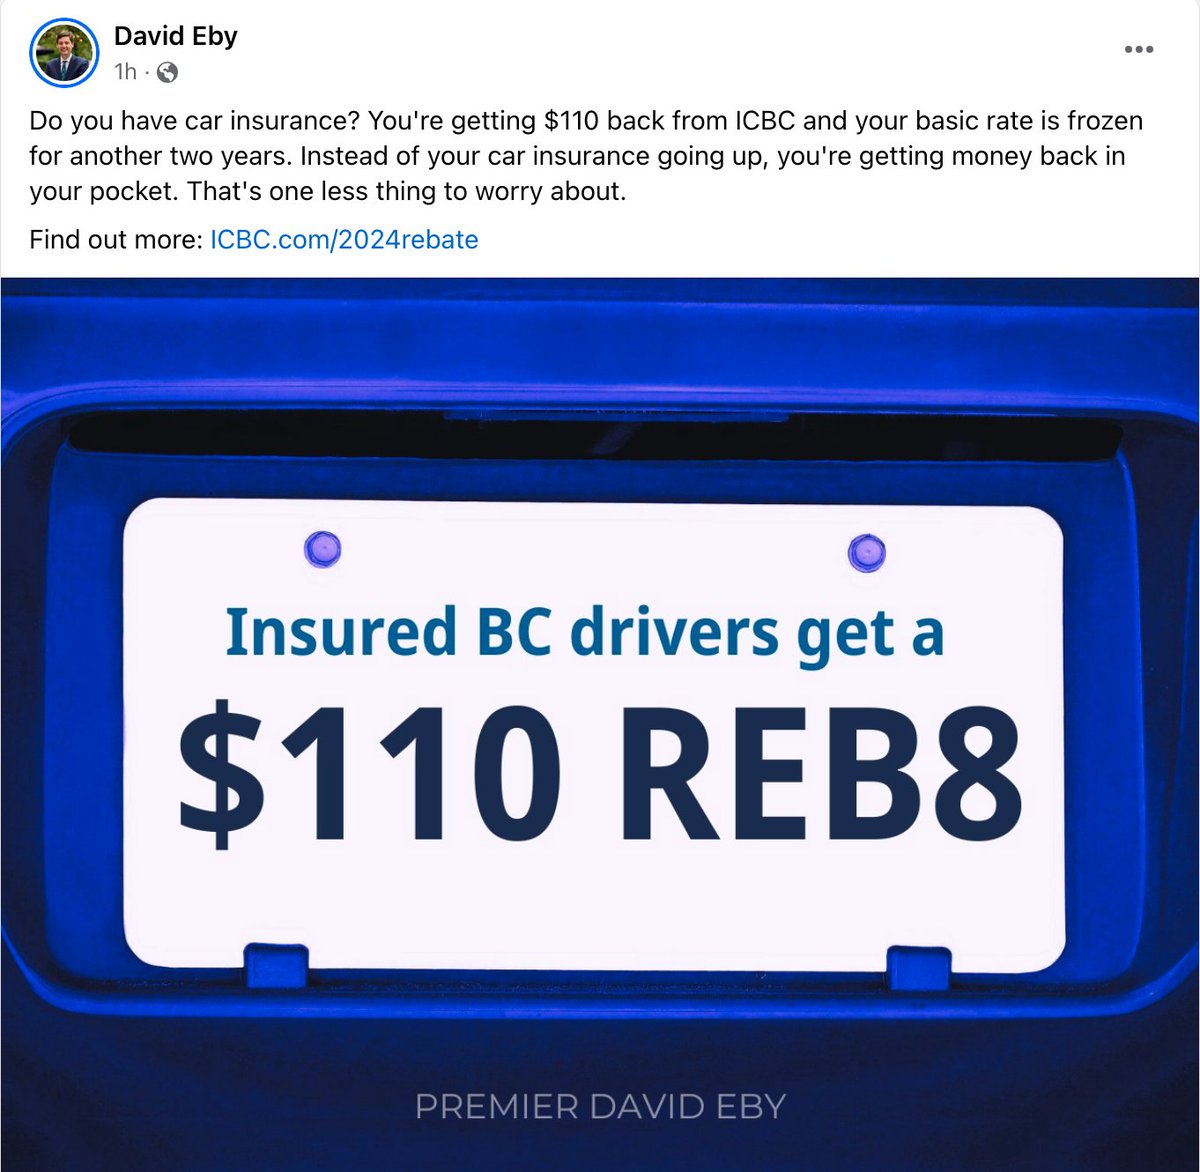 After years of sky-high ICBC rates, our BC NDP government stepped up to lower costs with historic cuts. Now, drivers are getting $110 back in their pockets with the 4th rebate to drivers since putting out the ICBC dumpster fire in 2020. And, we've frozen basic rates until 2026.